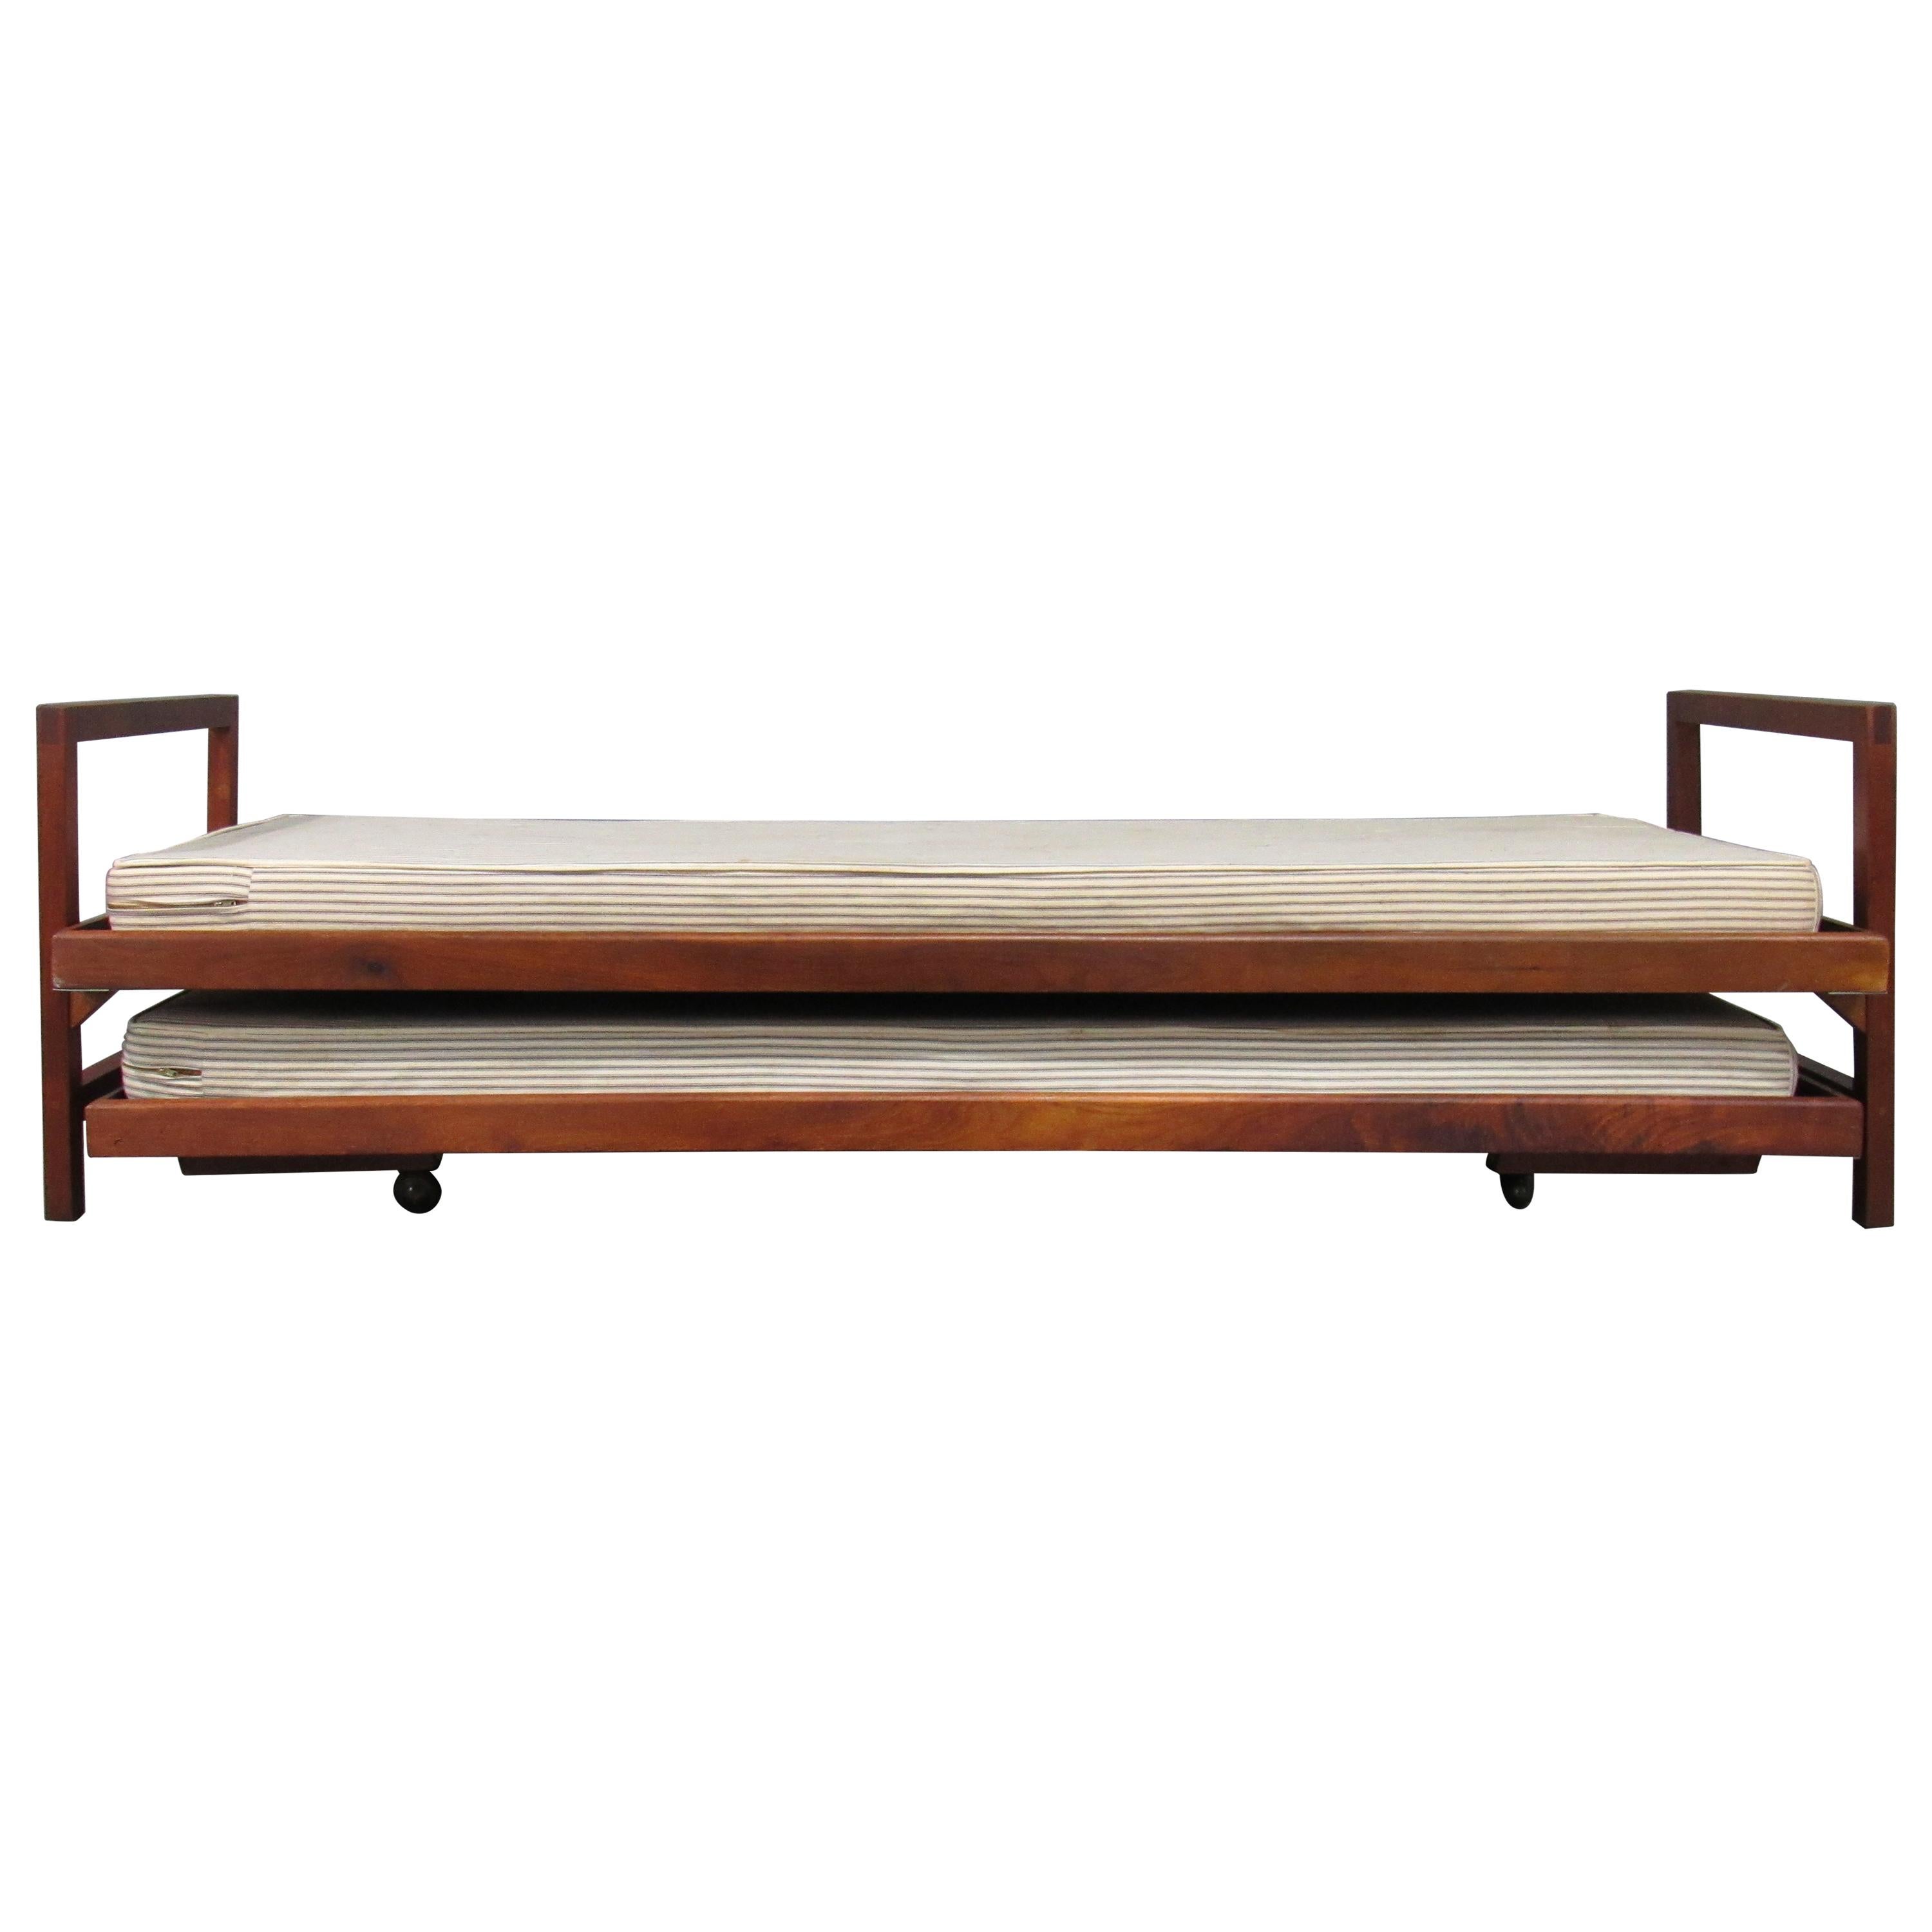 Mid-Century Modern Solid Walnut Trundle Pull-Out Daybed by Design Research